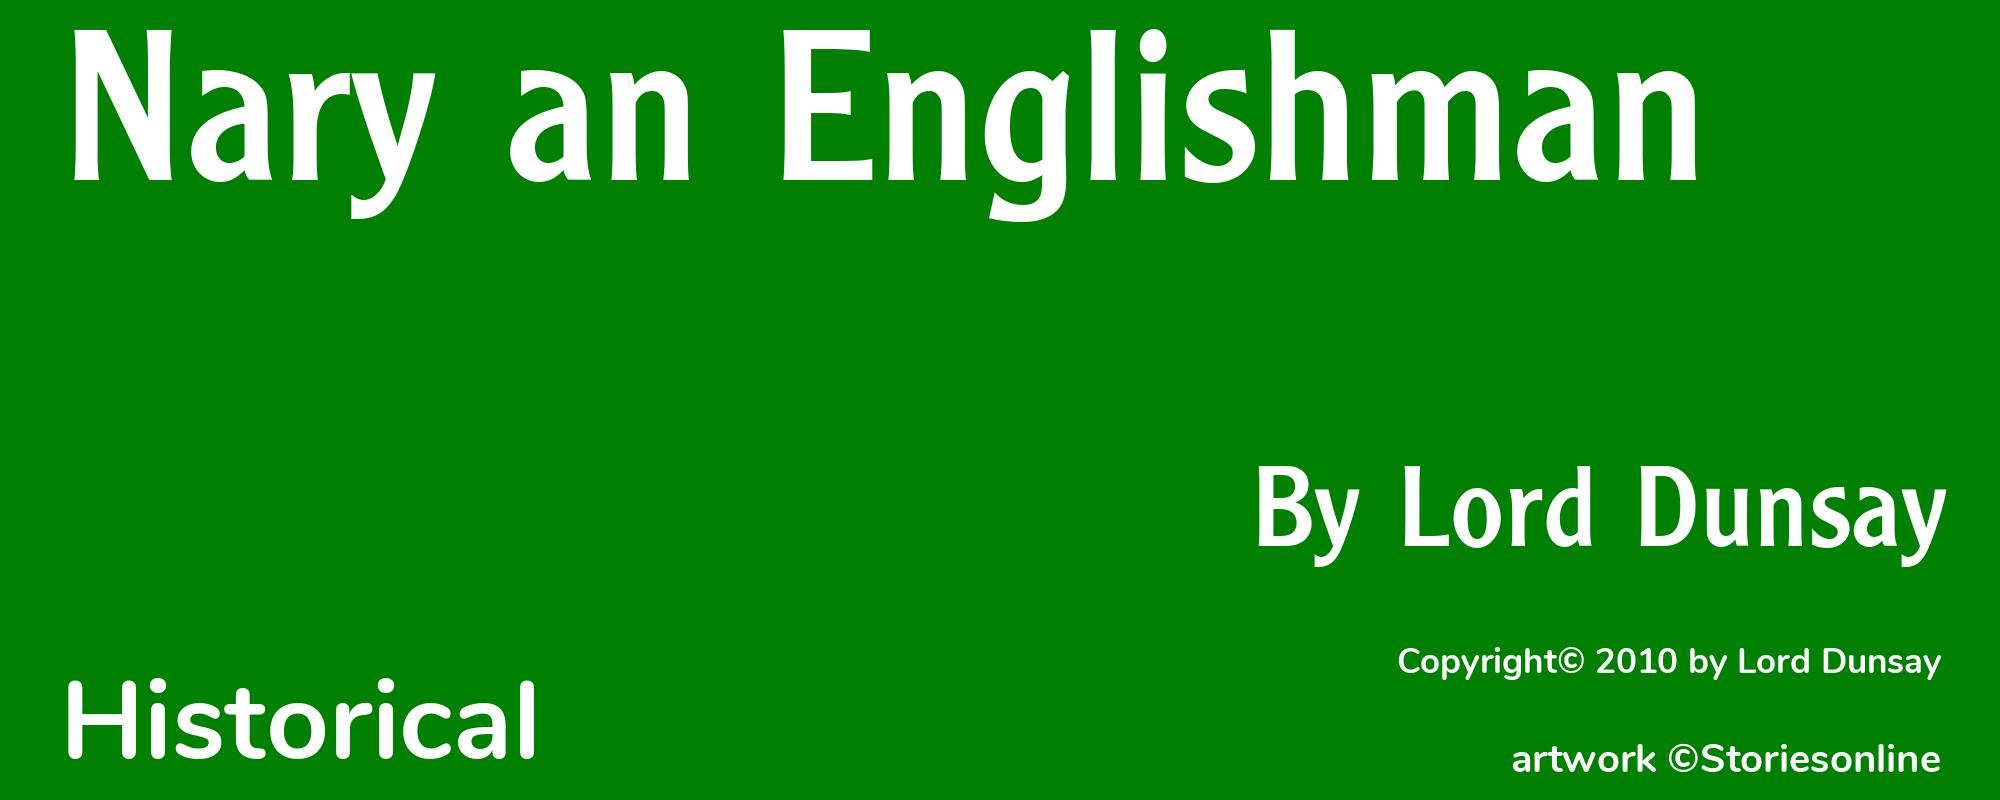 Nary an Englishman - Cover